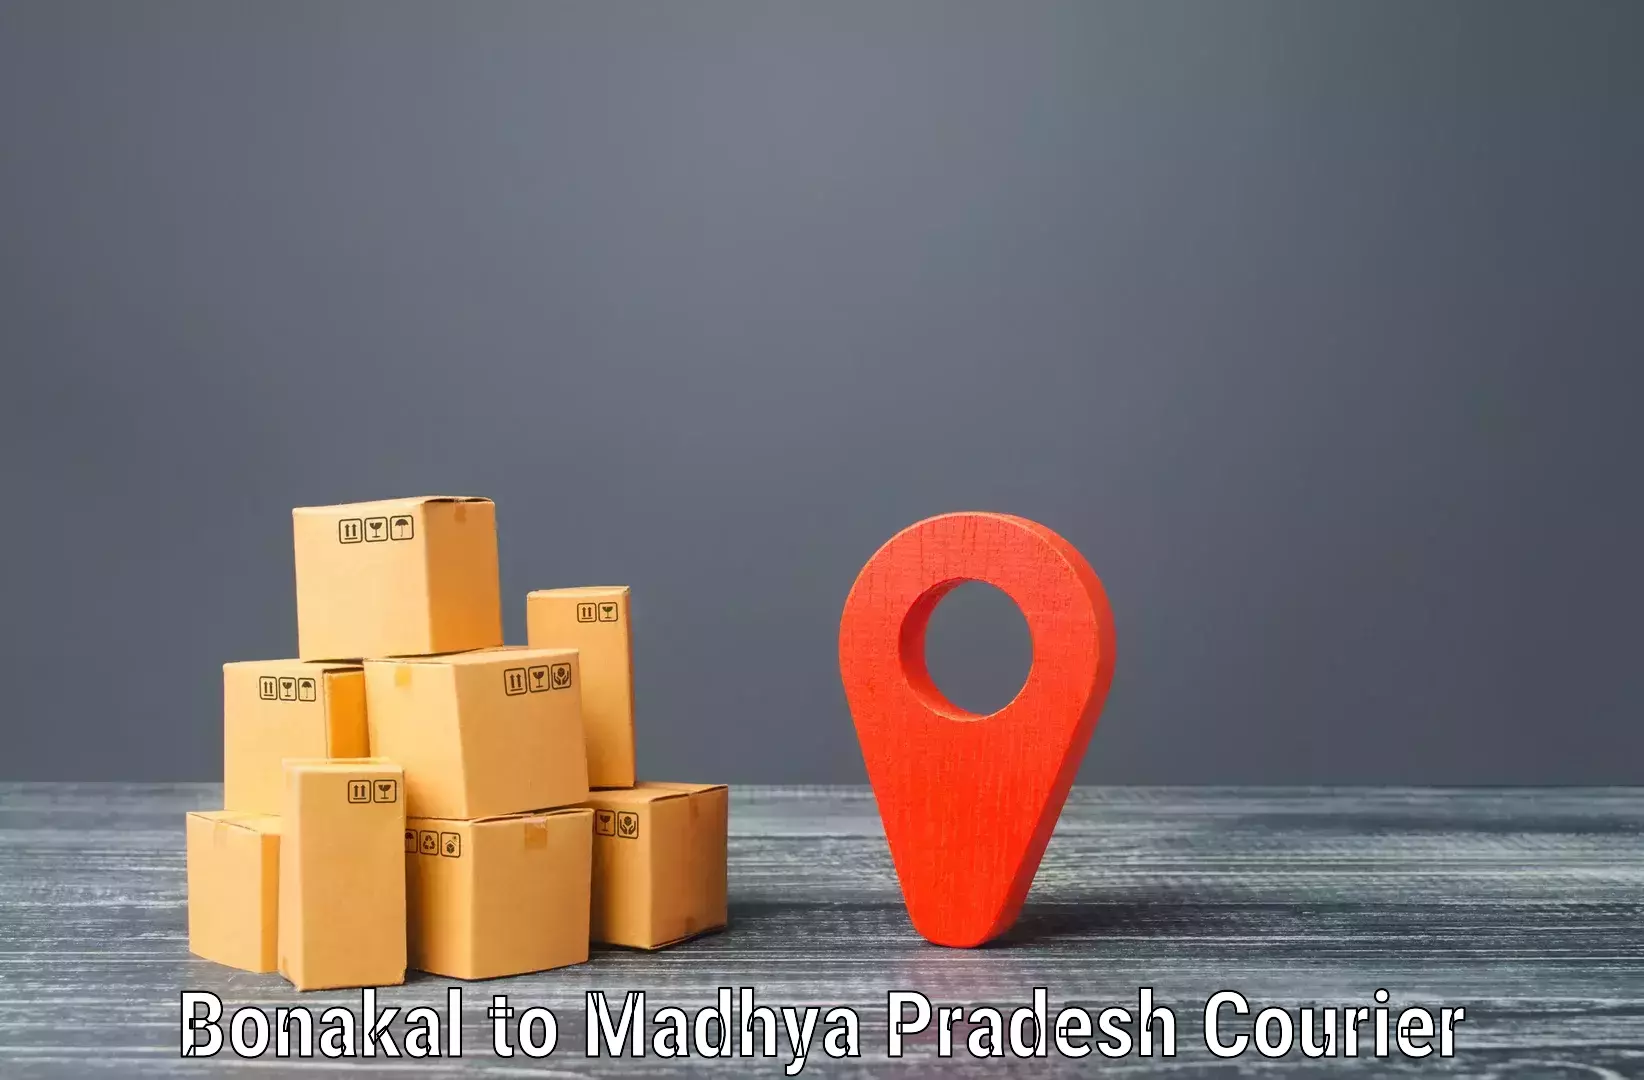 Full-service courier options Bonakal to Bhopal